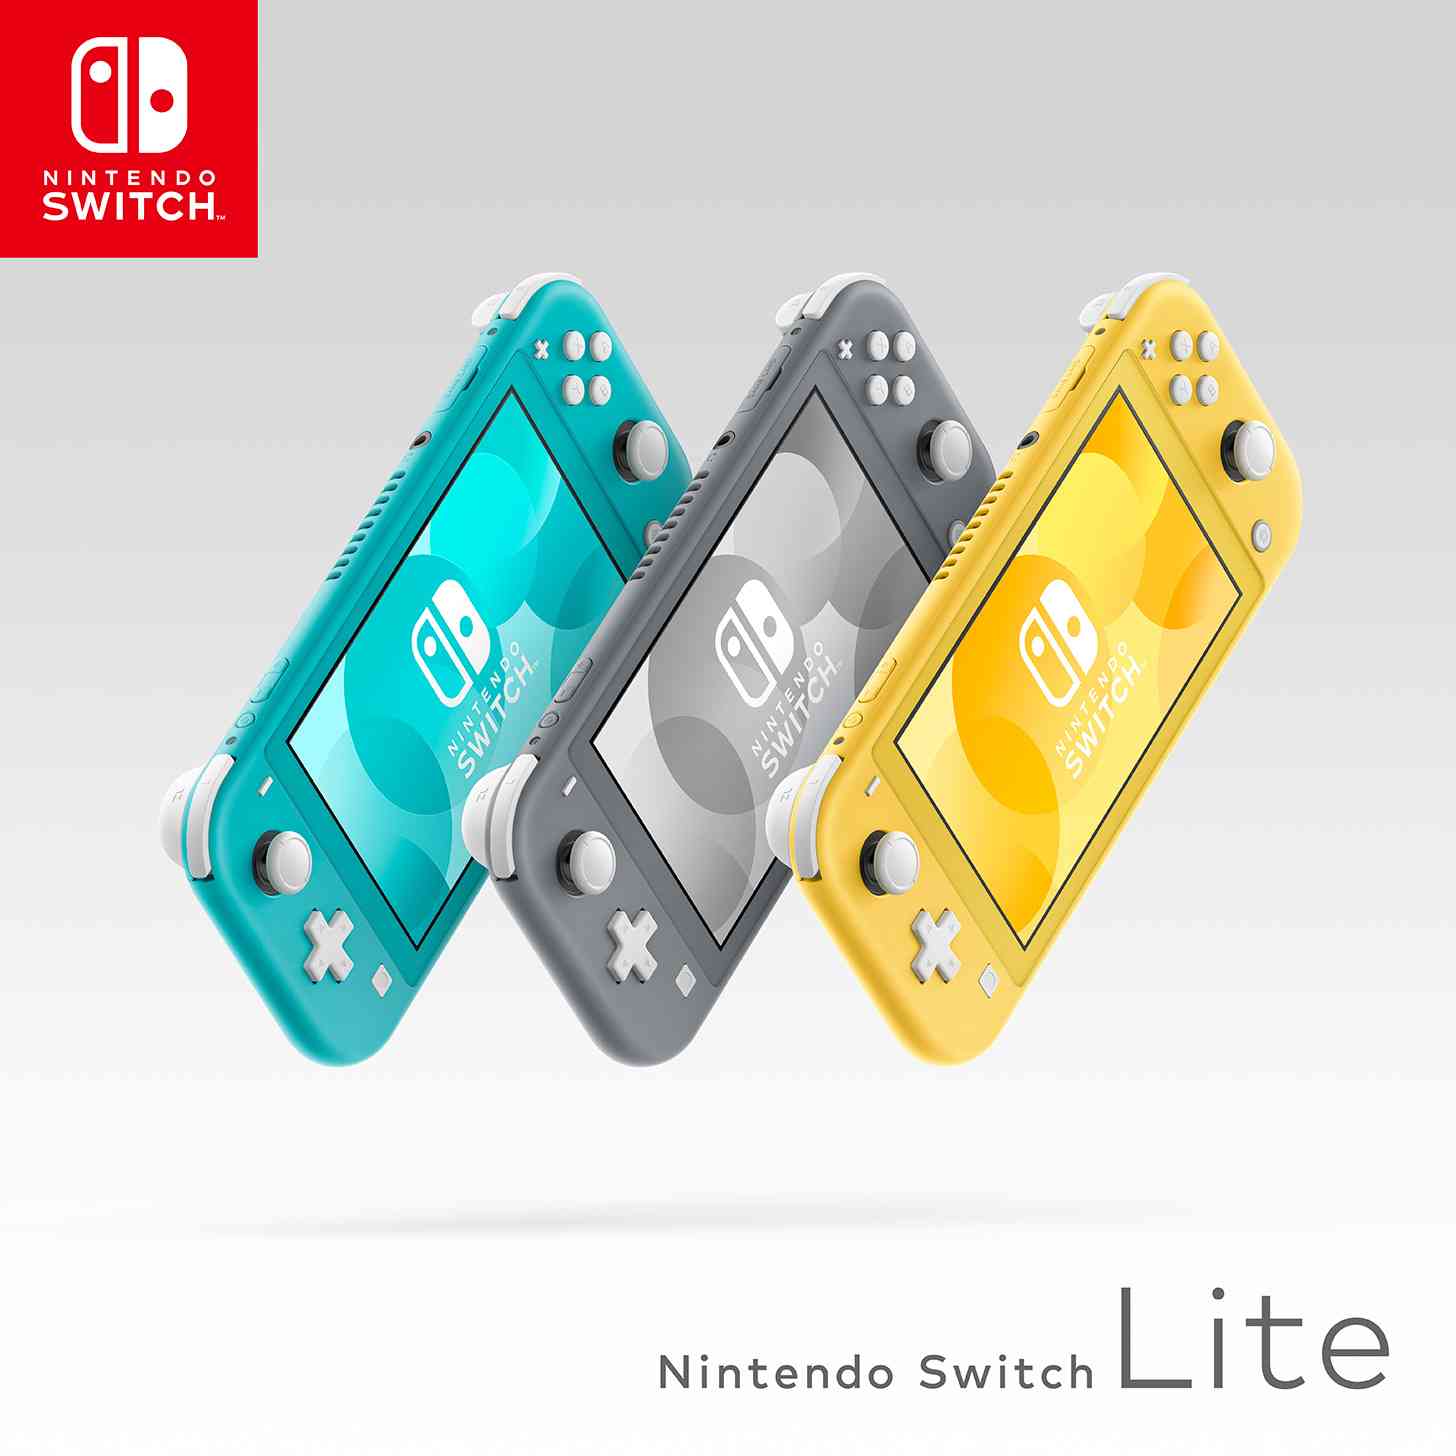 Nintendo Switch Lite official